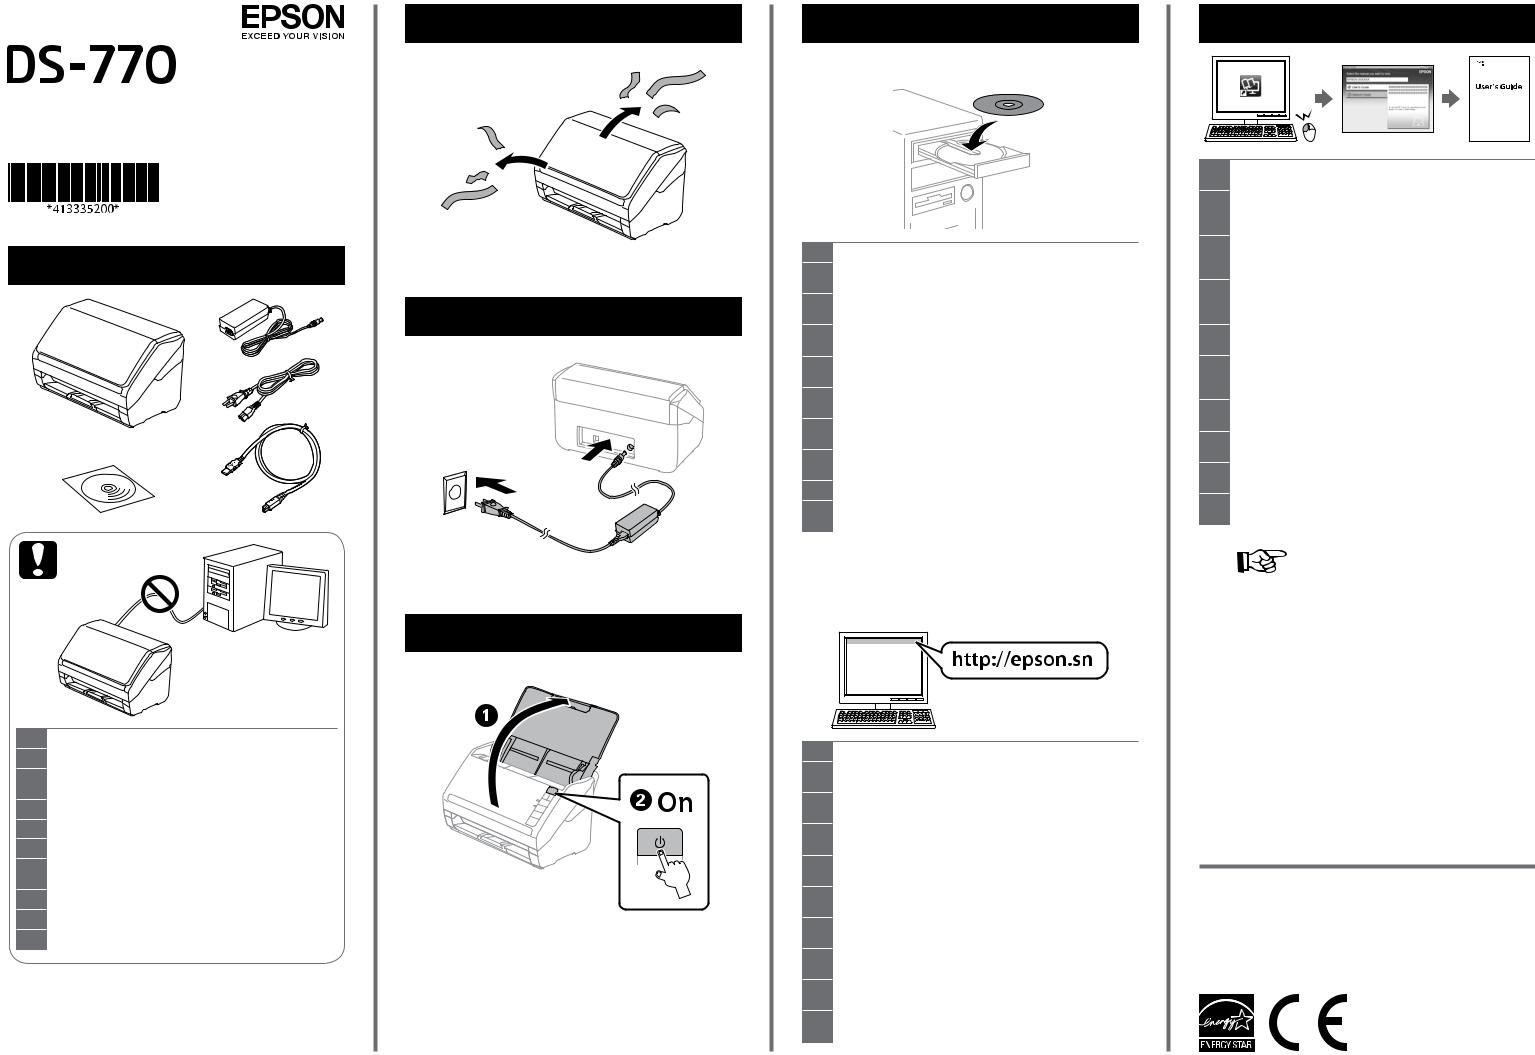 EPSON WORKFORCE DS-770 User Manual